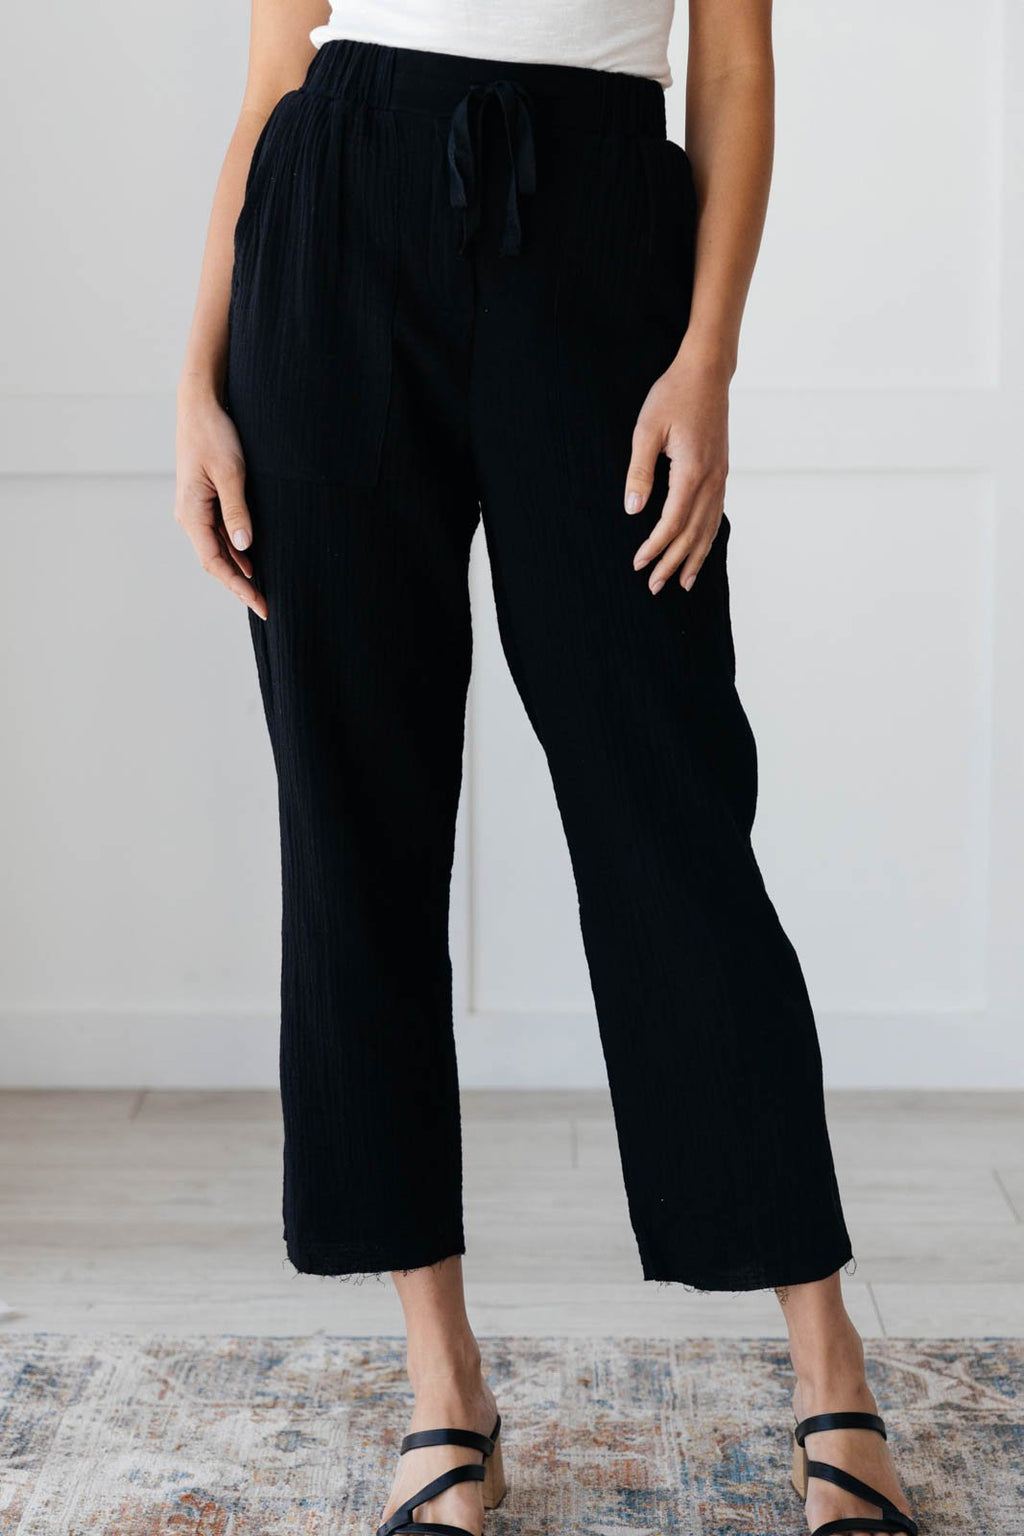 Mineral Wash Minimalist Pants in Hunter Green – Gina Marie's Brown Street  Boutique